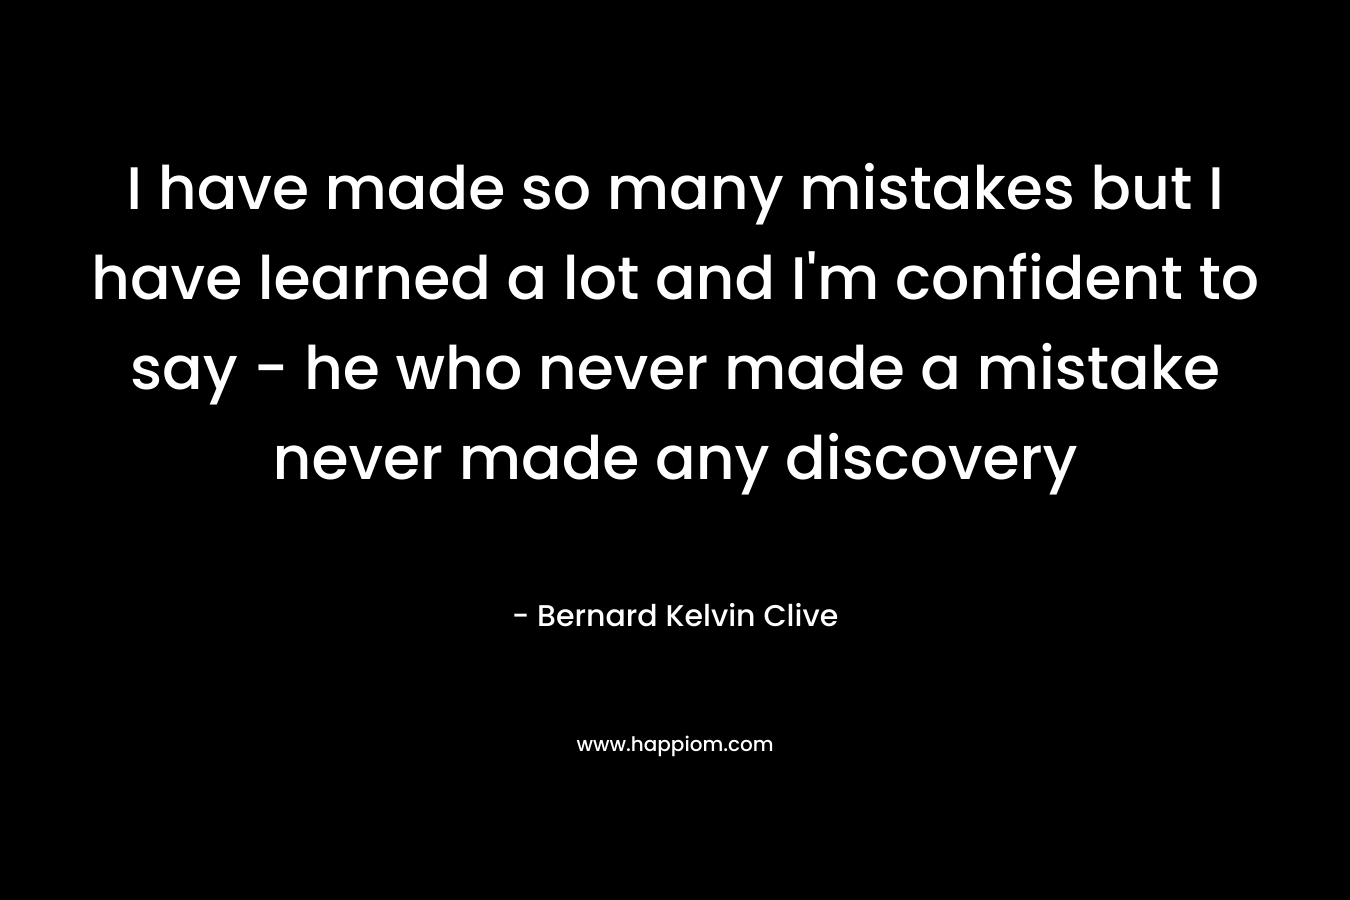 I have made so many mistakes but I have learned a lot and I'm confident to say - he who never made a mistake never made any discovery